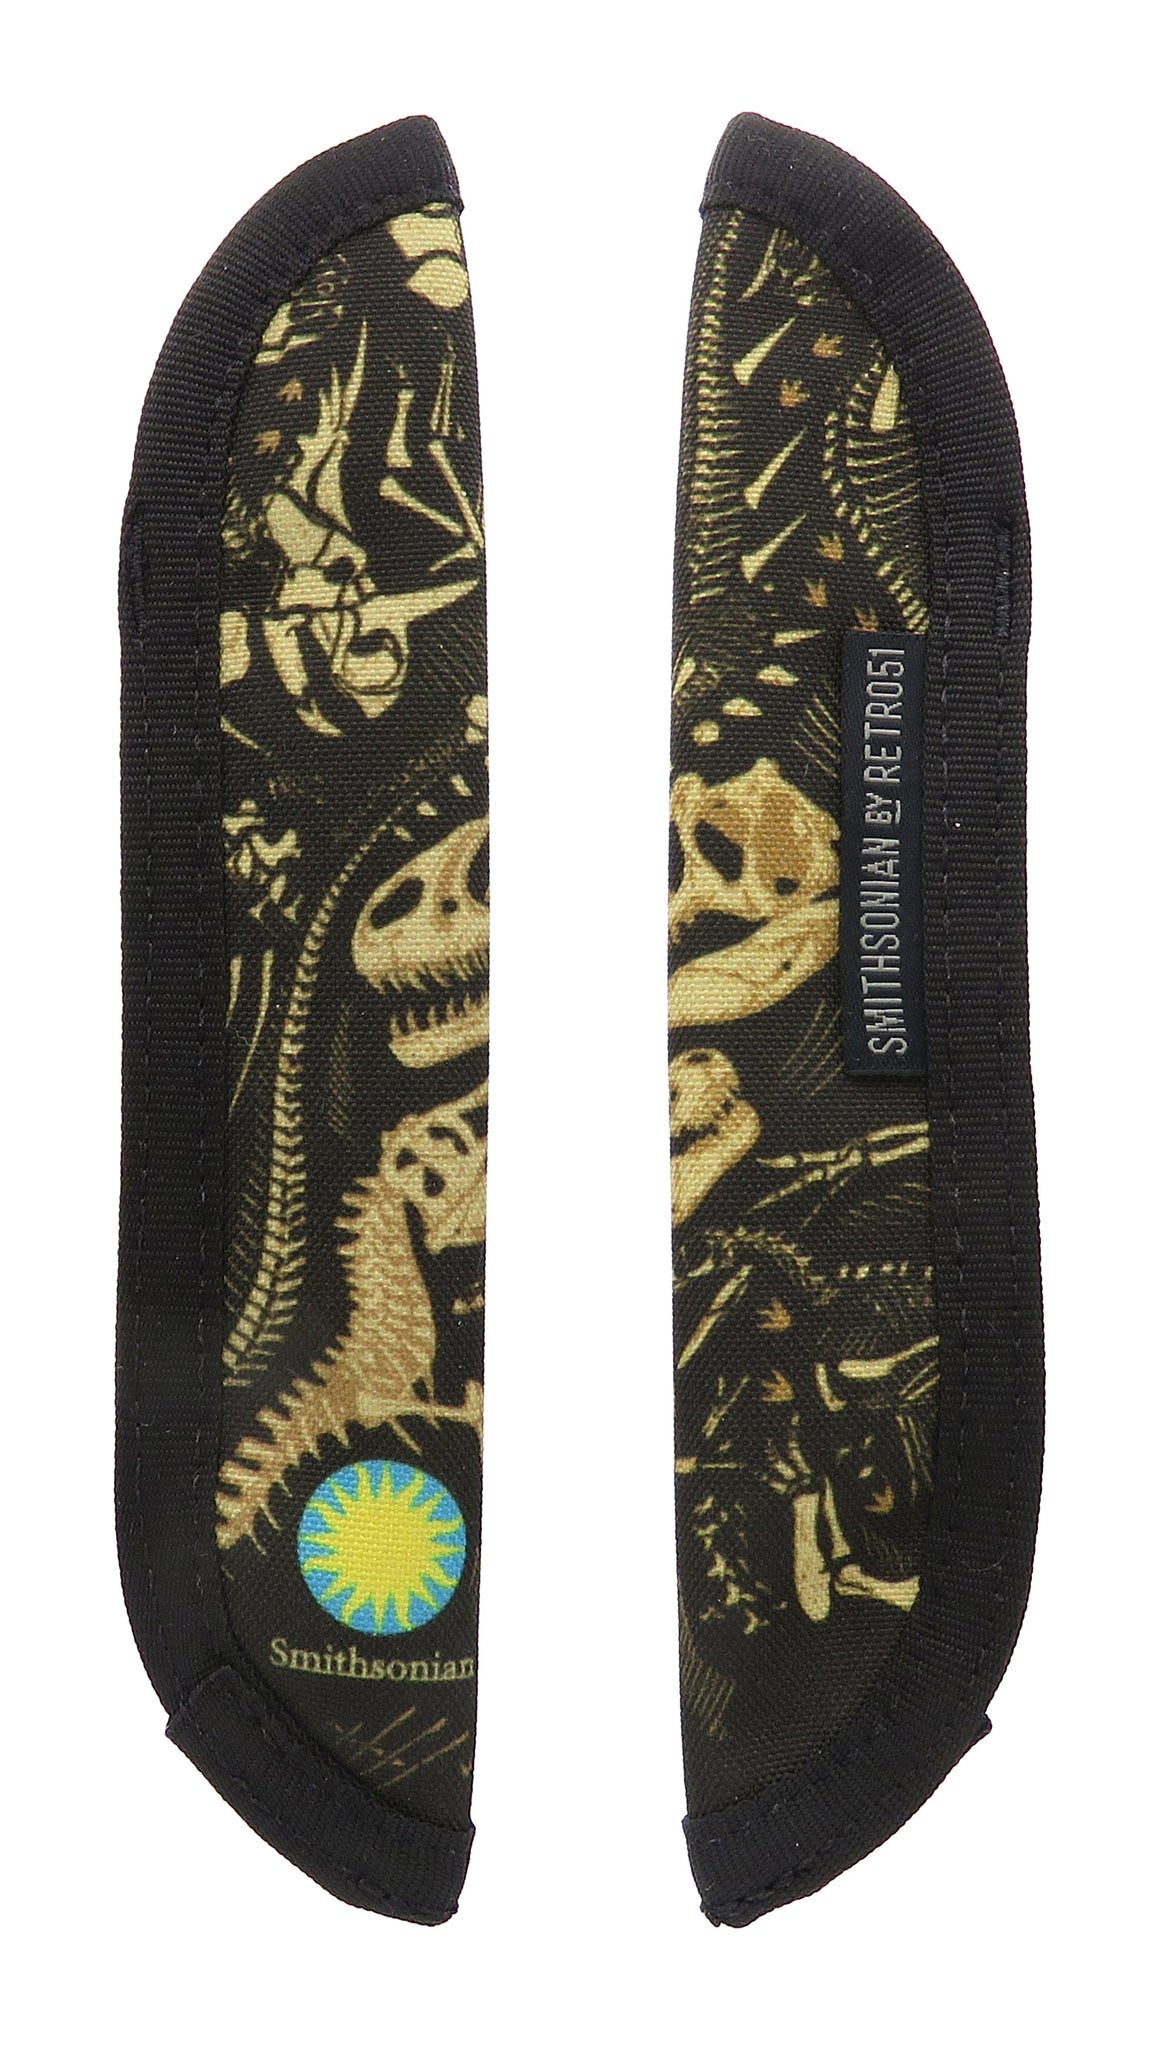 Dino Fossil Sleeve, by Rickshaw to match "Smithsonian" pens